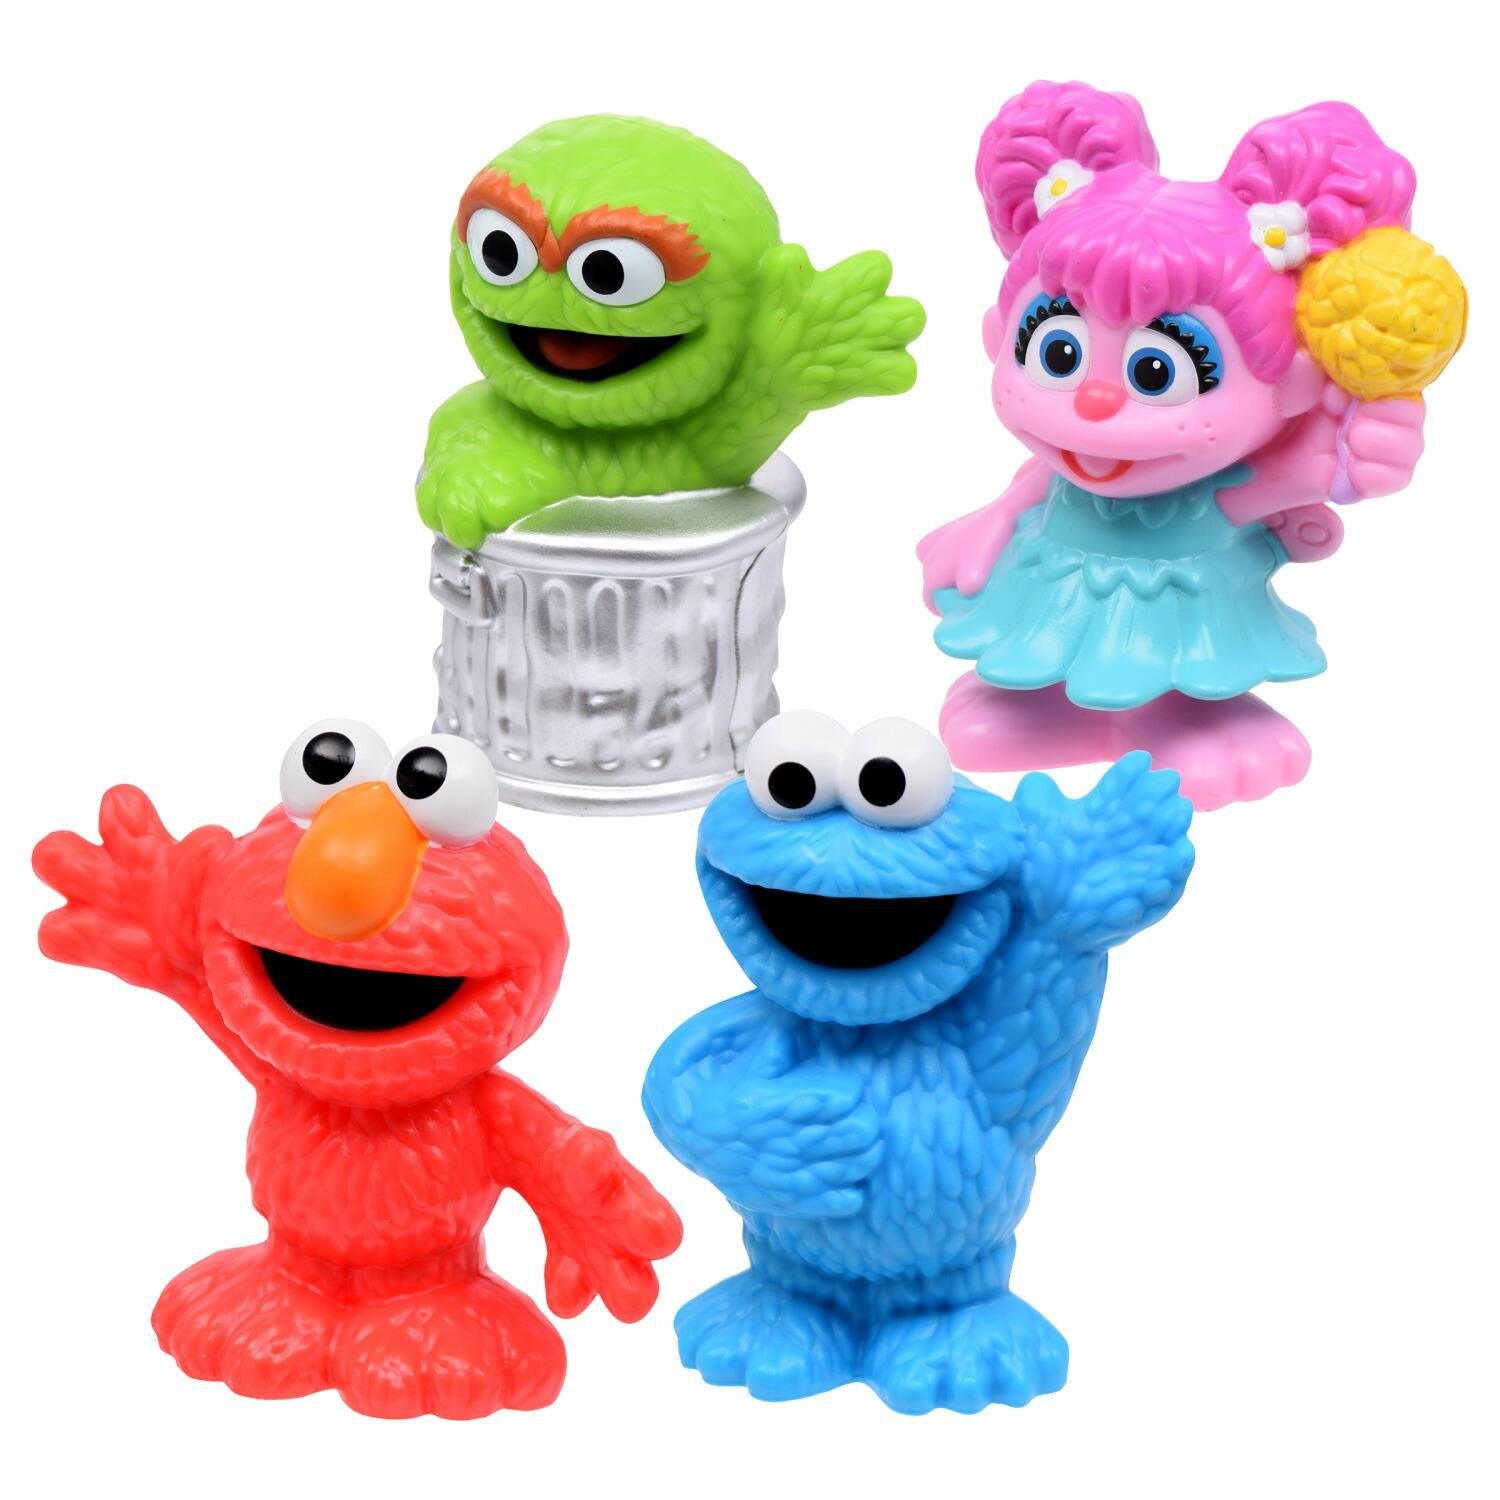 Sesame Street Cute and Collectable Figurines